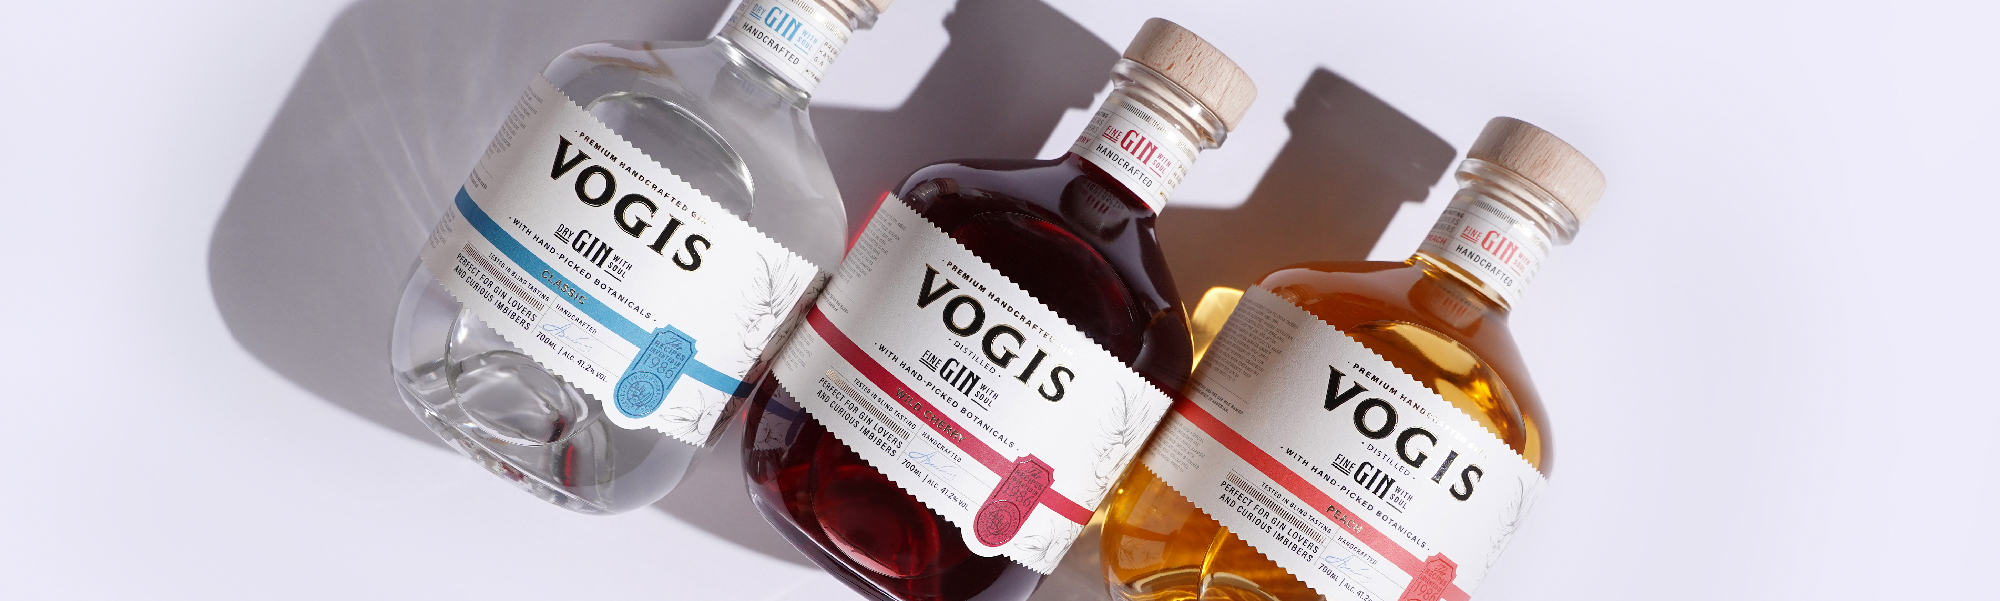 Inspired By A Grandfathers Story Vogis Gin Was Born Dieline